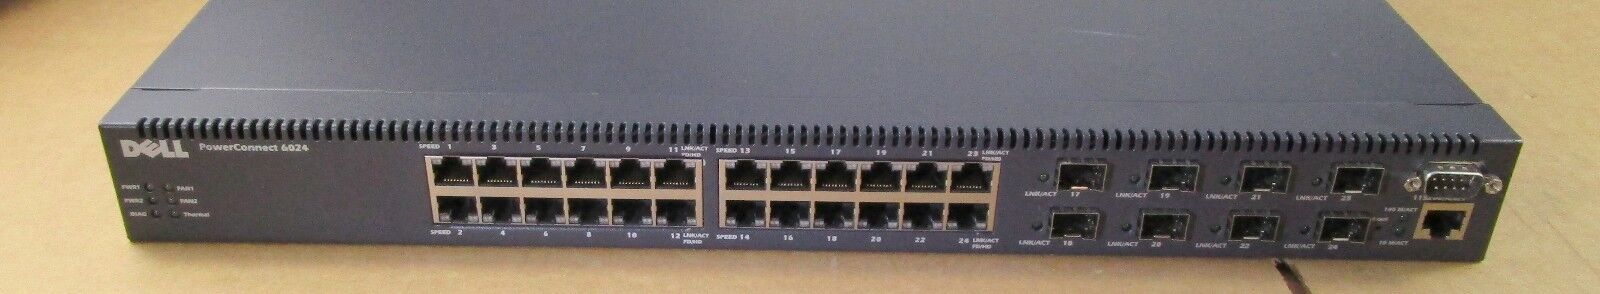 Dell R1799 Powerconnect 6024 24-Port Network Gigabit Switch + 8 SFP Ports